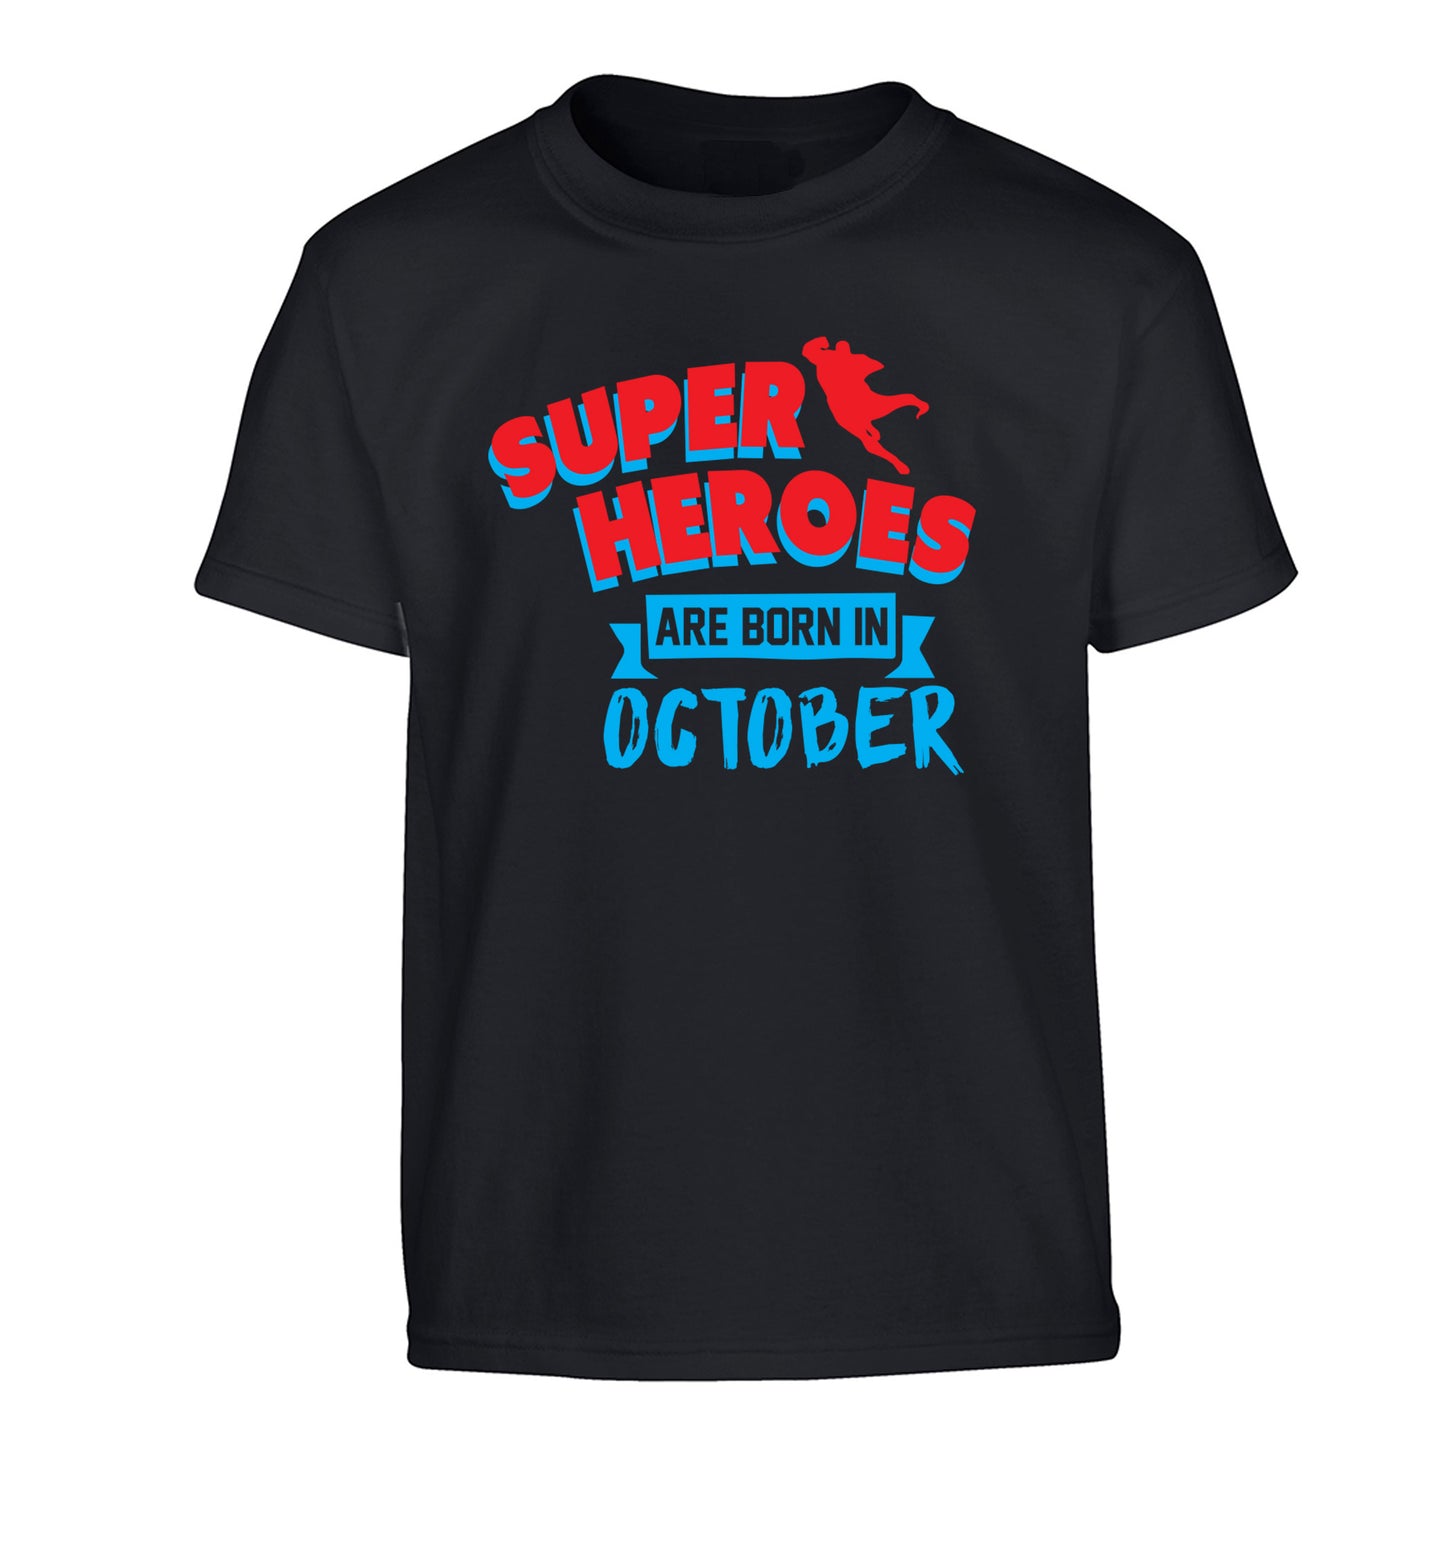 Superheroes are born in October Children's black Tshirt 12-13 Years